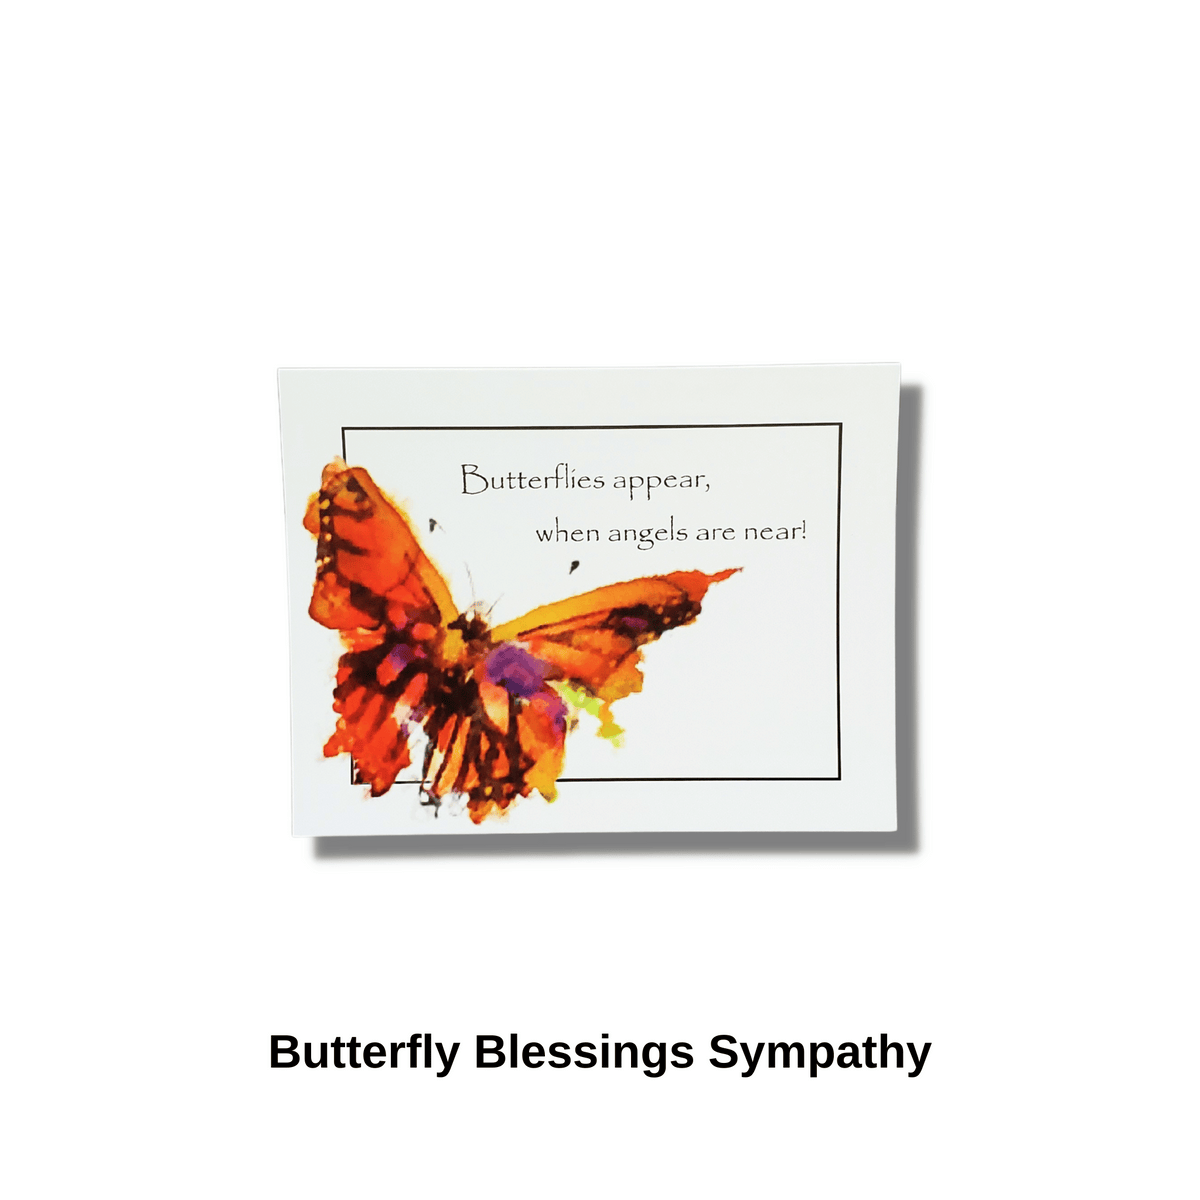 Butterfly Blessings Sympathy